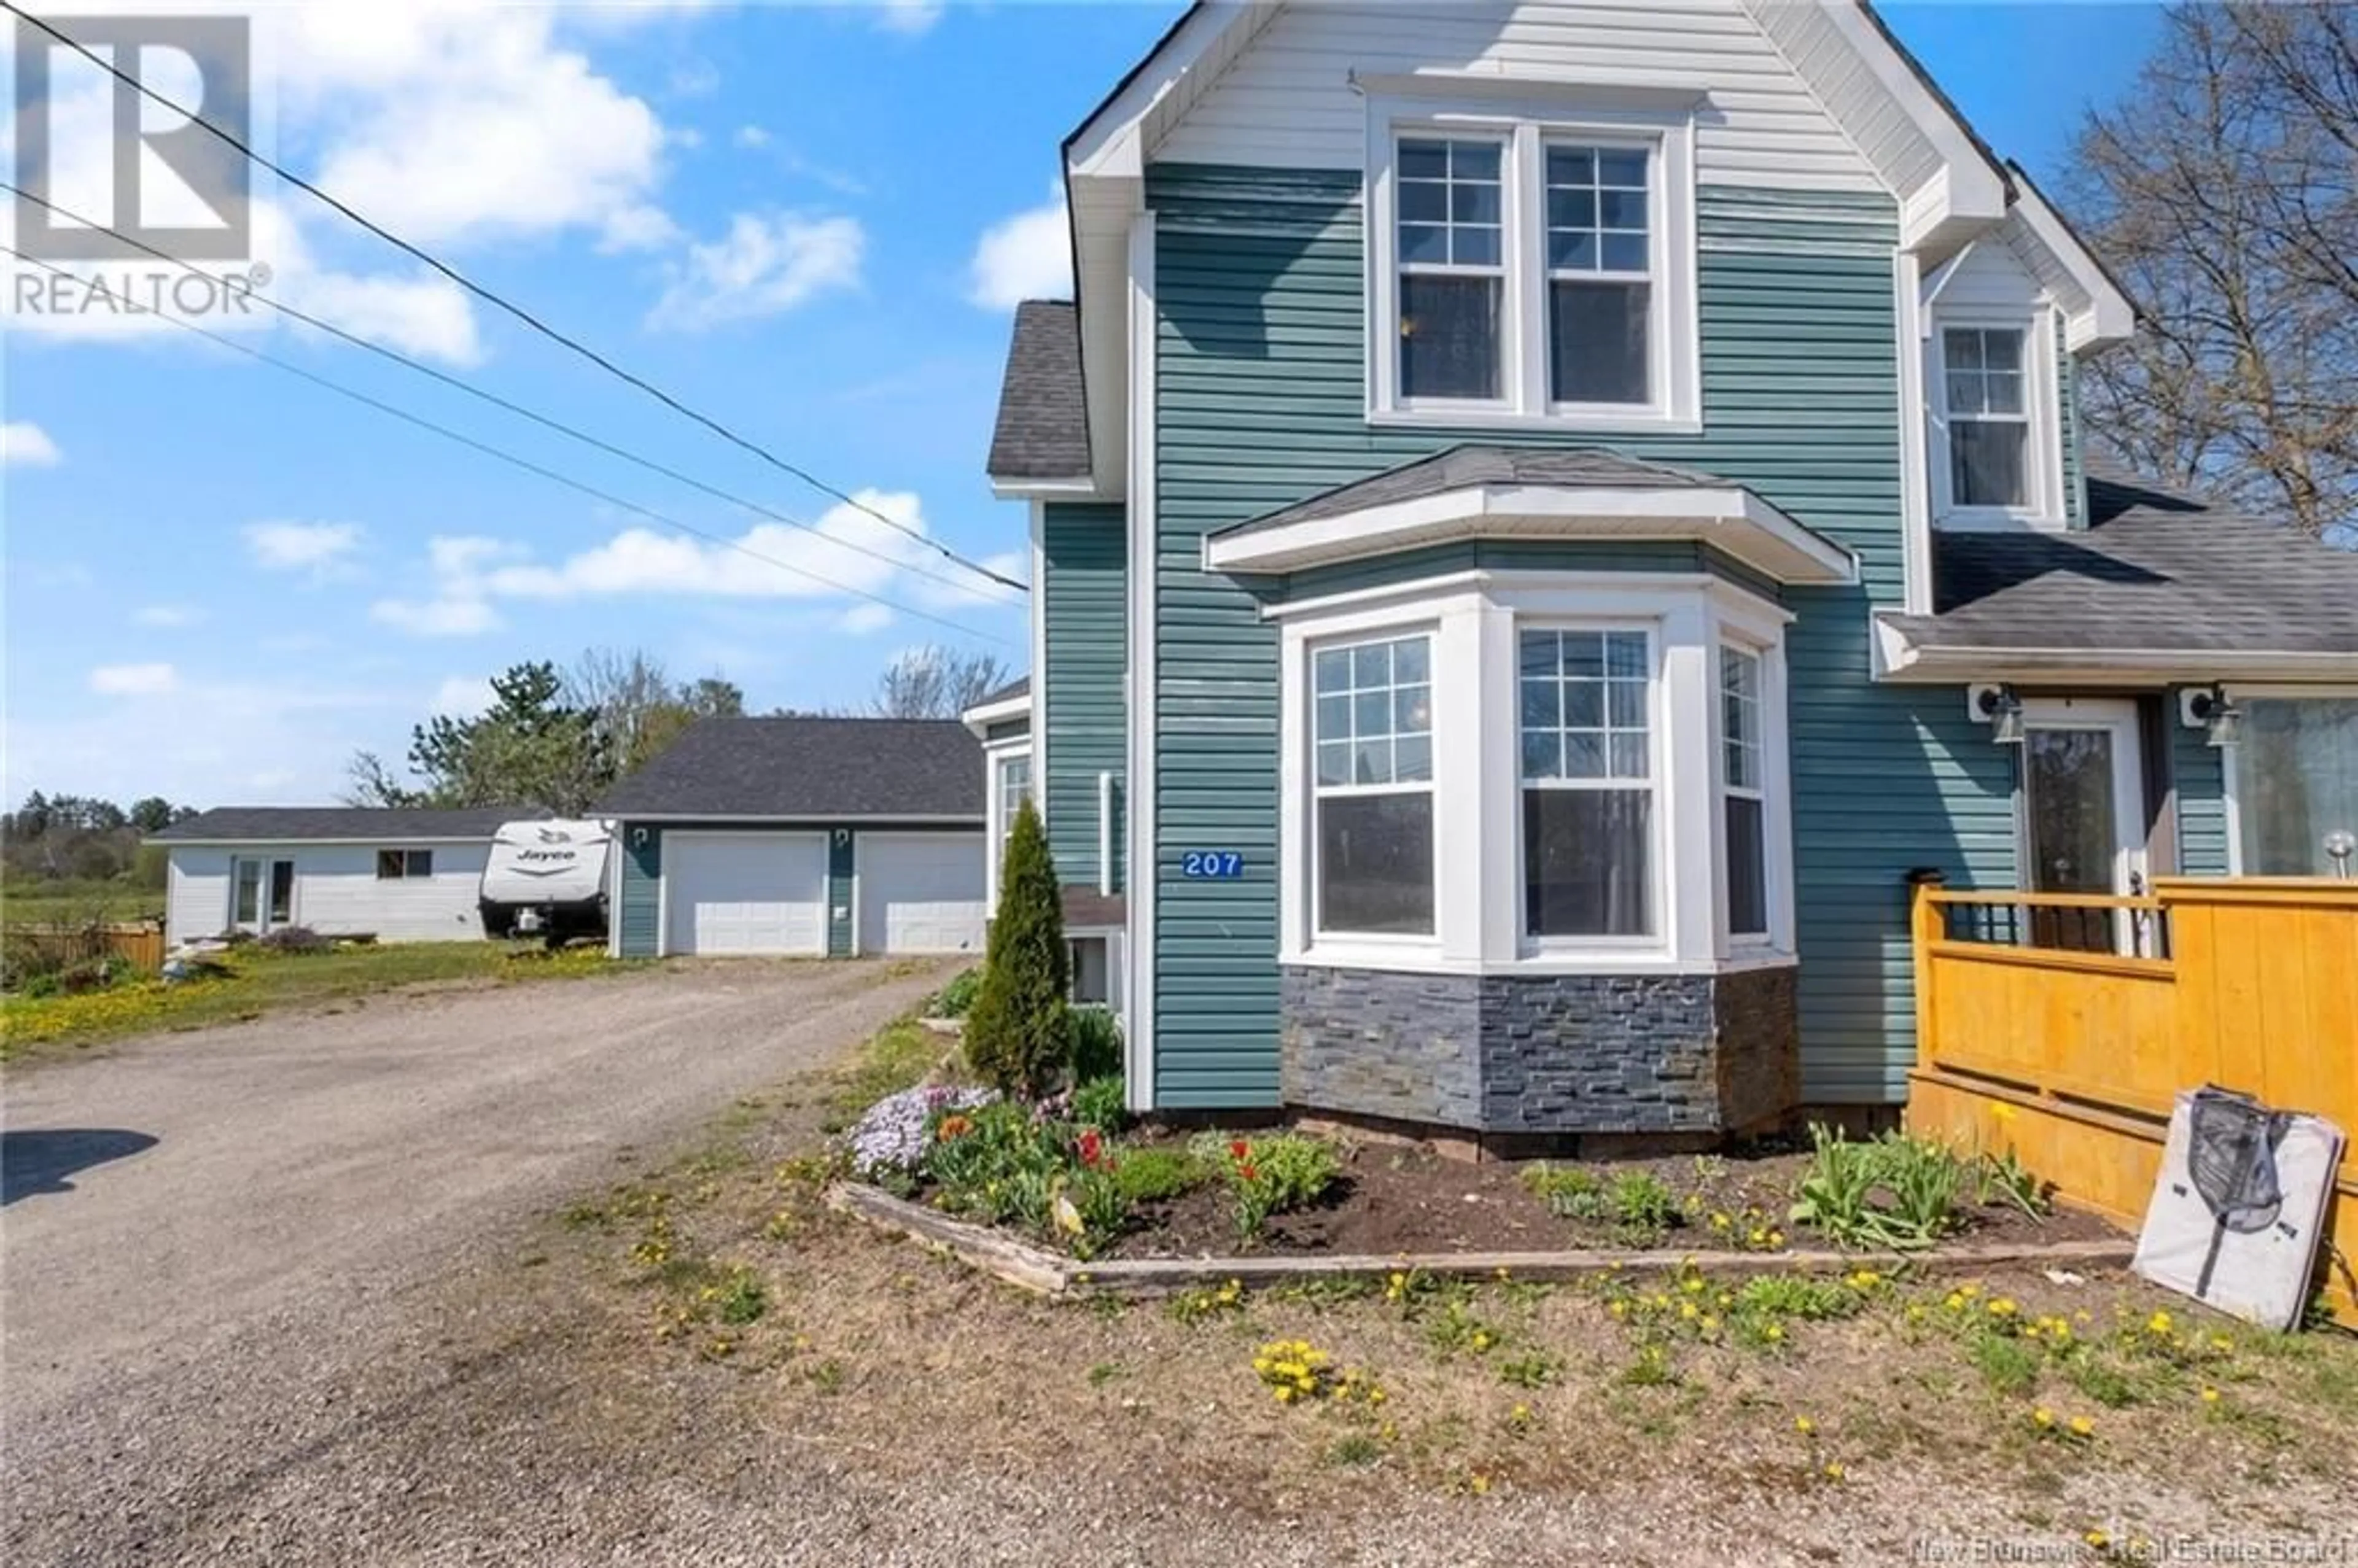 Frontside or backside of a home for 207 Old Post Road, Petitcodiac New Brunswick E4Z4N3